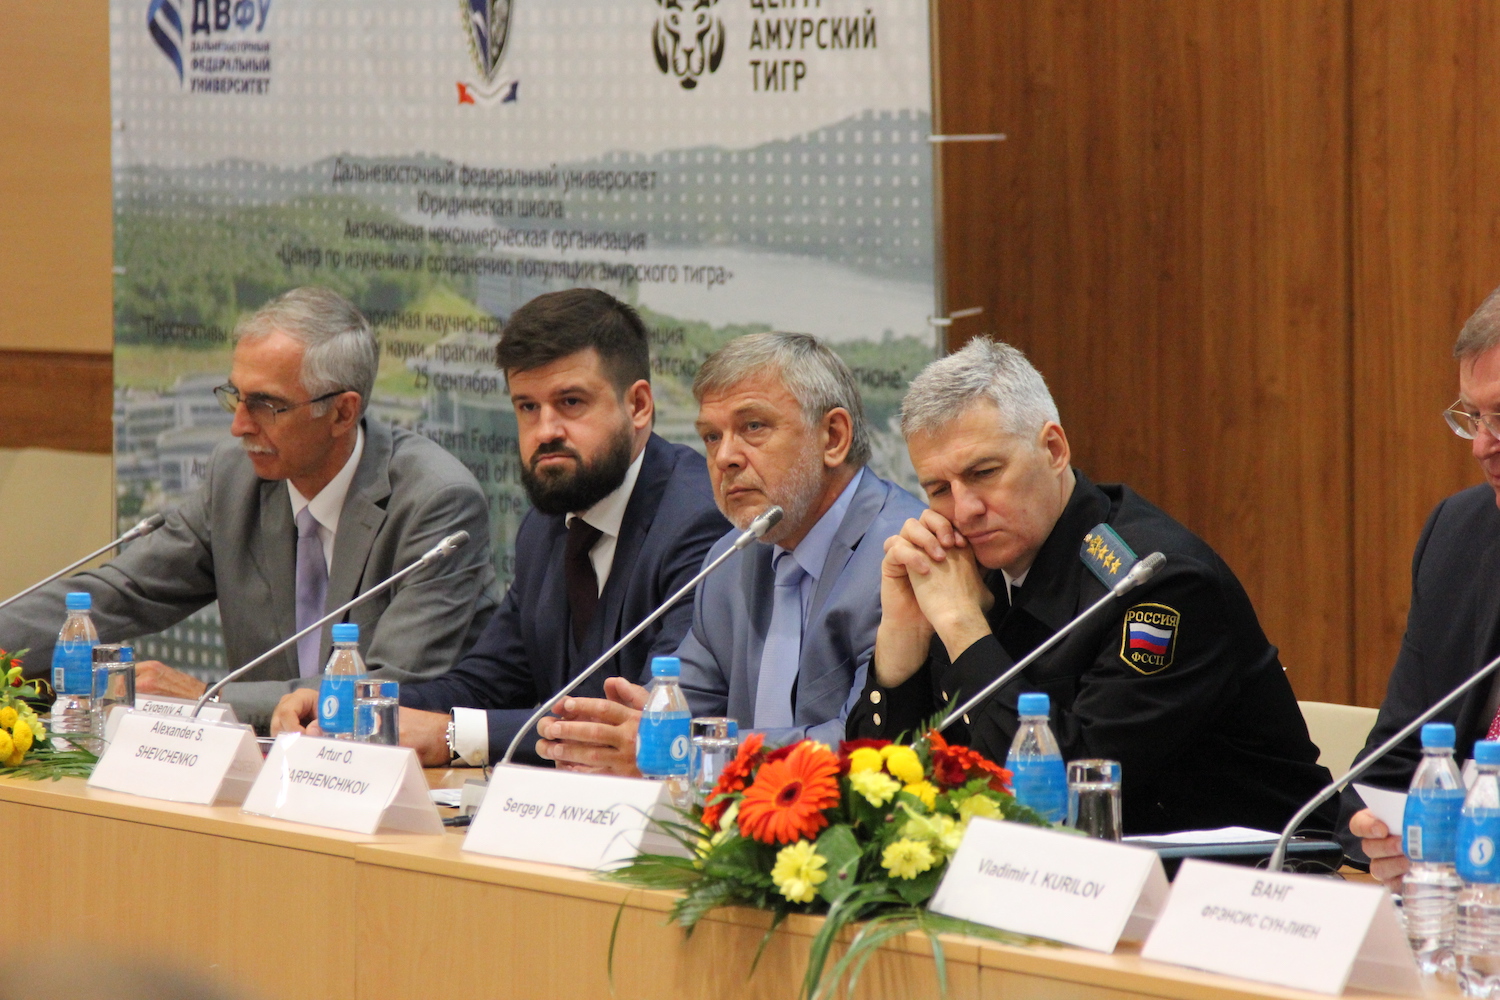 Specialists discussed problems of legal protection of the environment in the Far Eastern Federal University